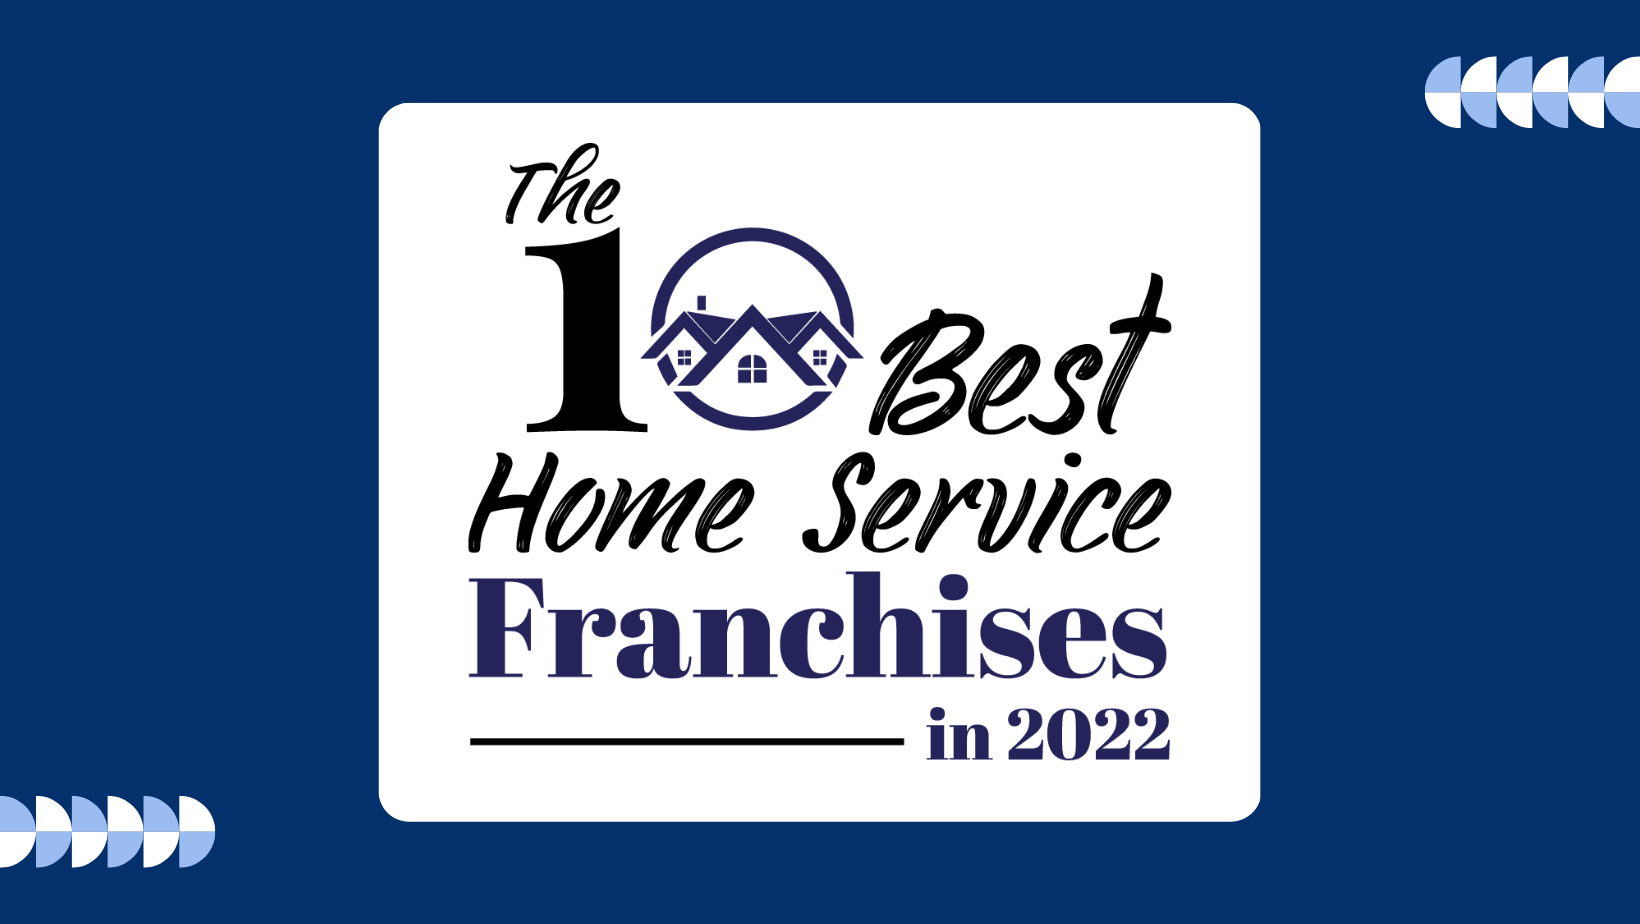 Caring Named Top 10 Best Home Service Franchise 2022 by Aspioneer